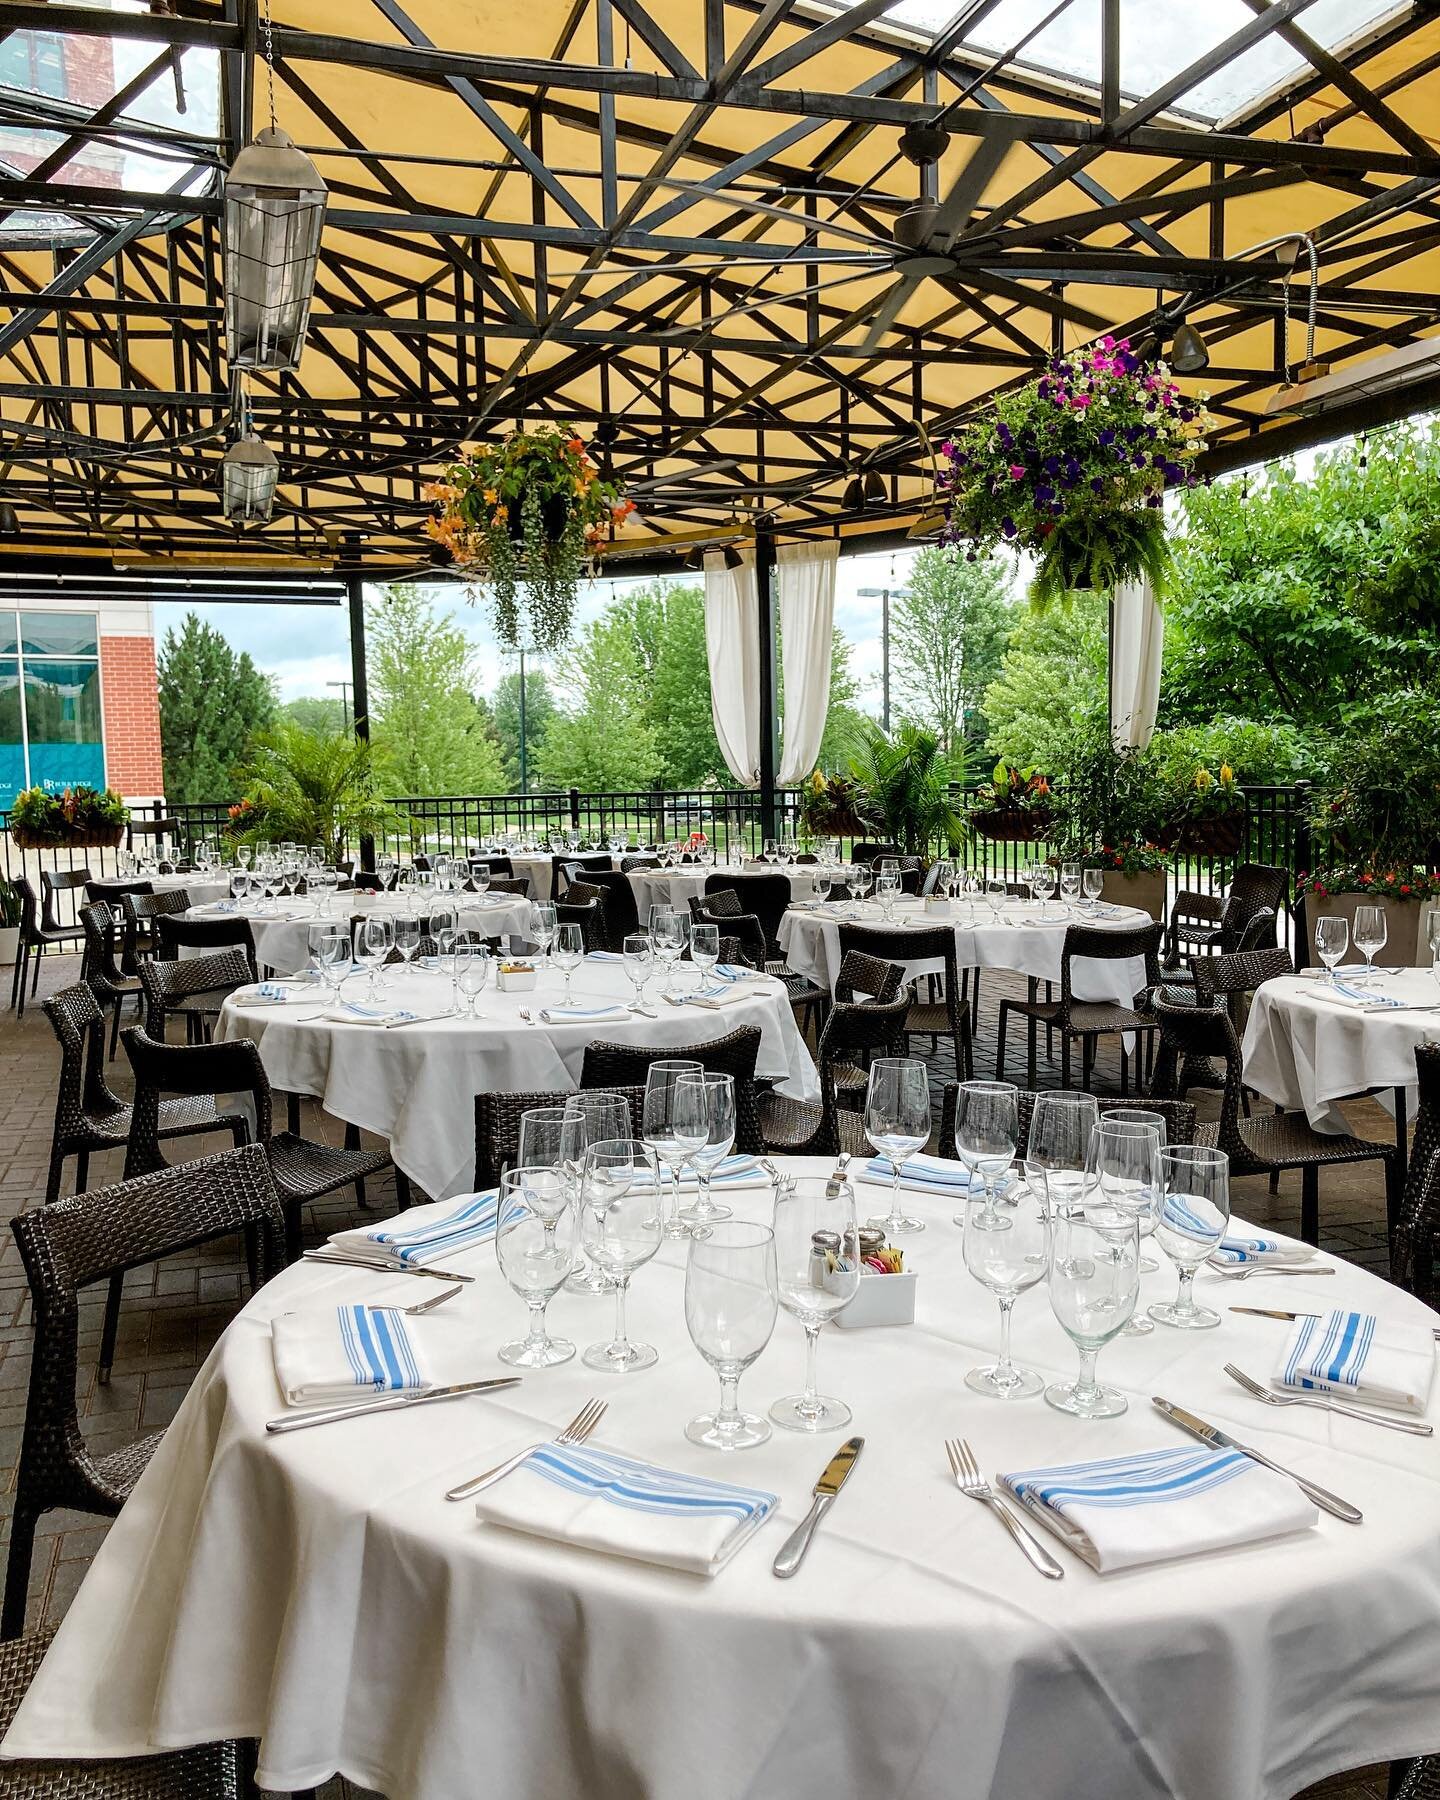 Use our patio for your next event! ☀️ Head to the link in our bio to fill out an event request form!